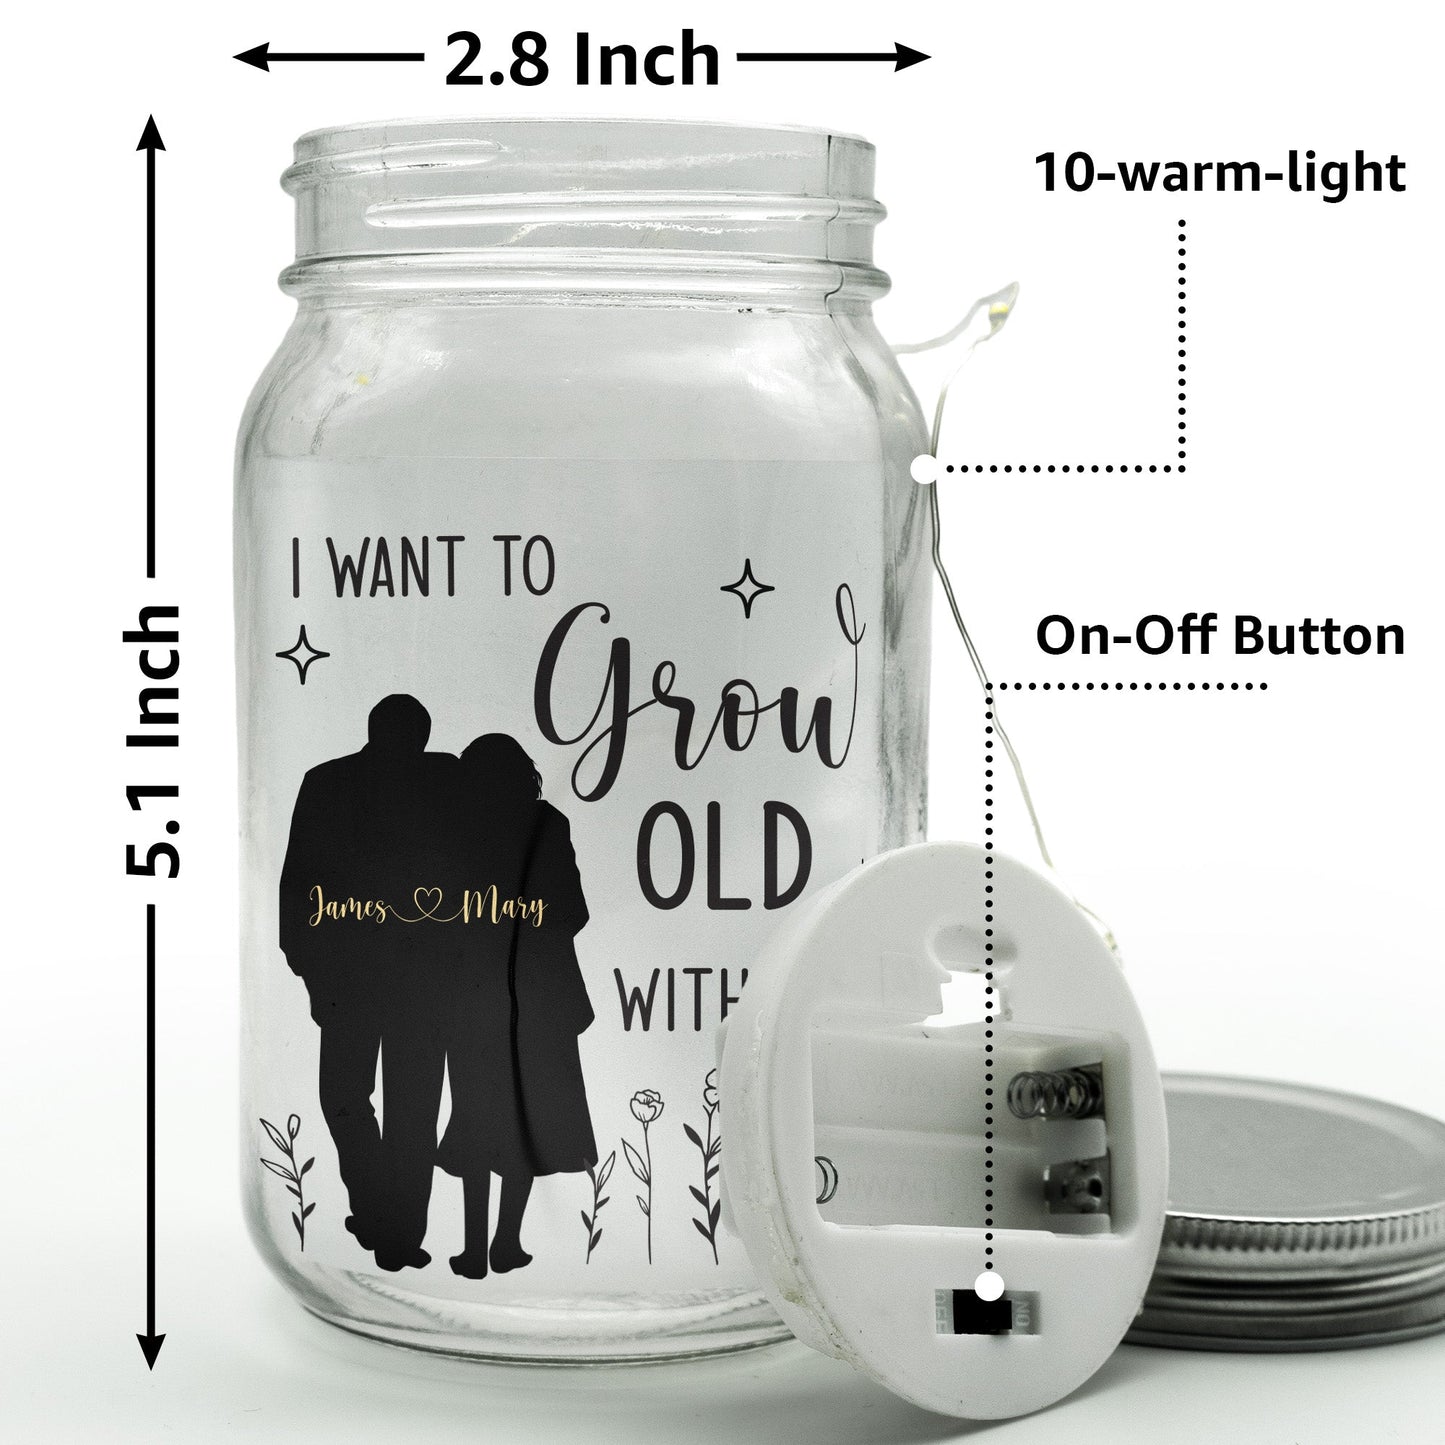 I Want To Grow Old With You - Personalized Mason Jar Light